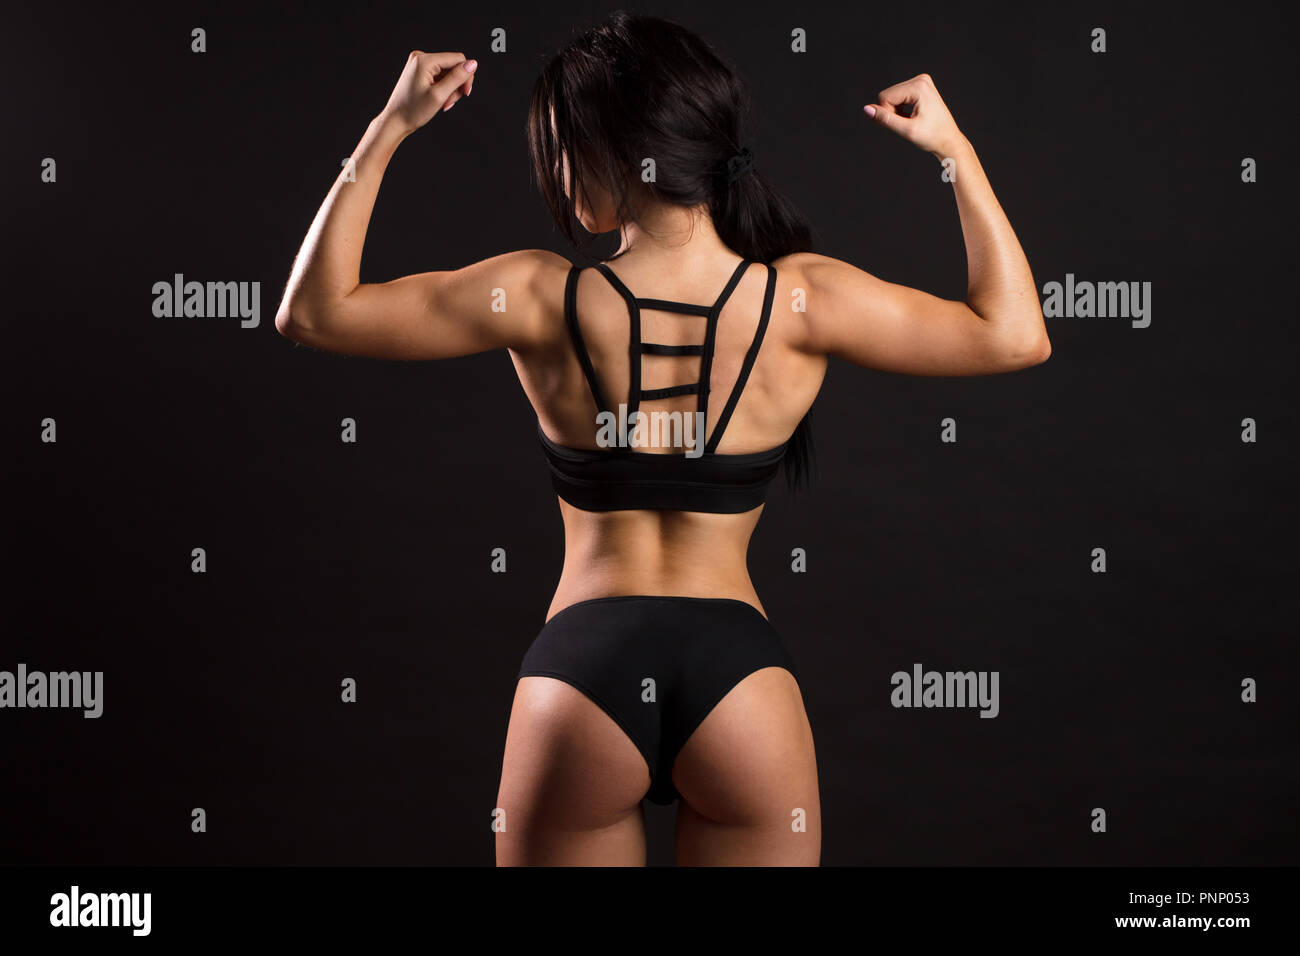 Rear view of woman with muscular body. Fitness female showing